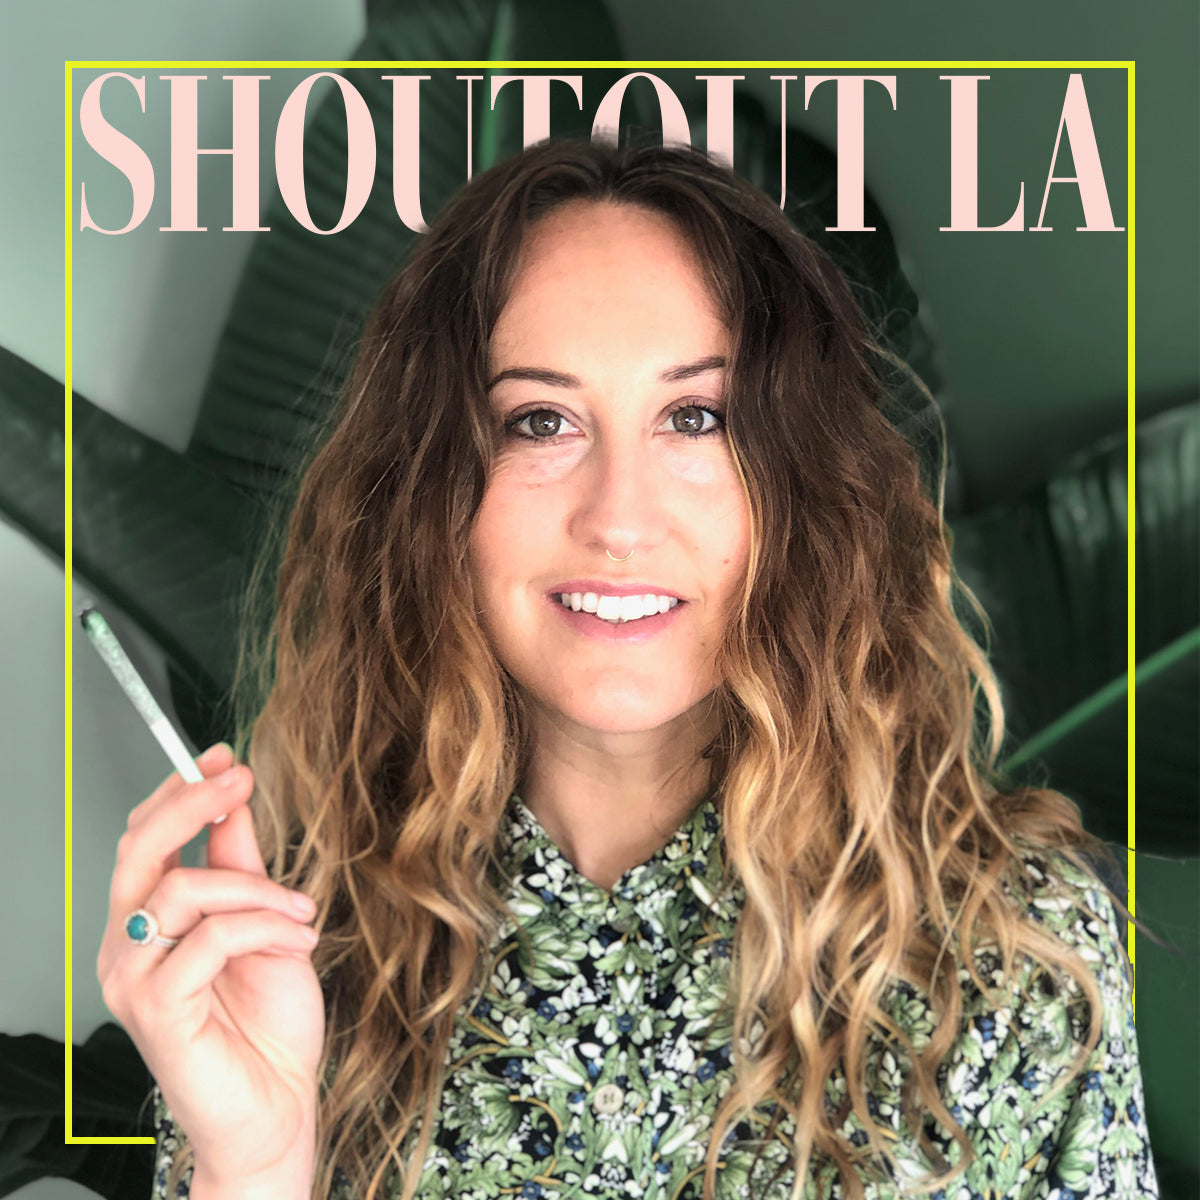 SHOUTOUT LA / VOYAGE MAG DISCUSS CBD BUSINESS CHALLENGES WITH OUR FOUNDER